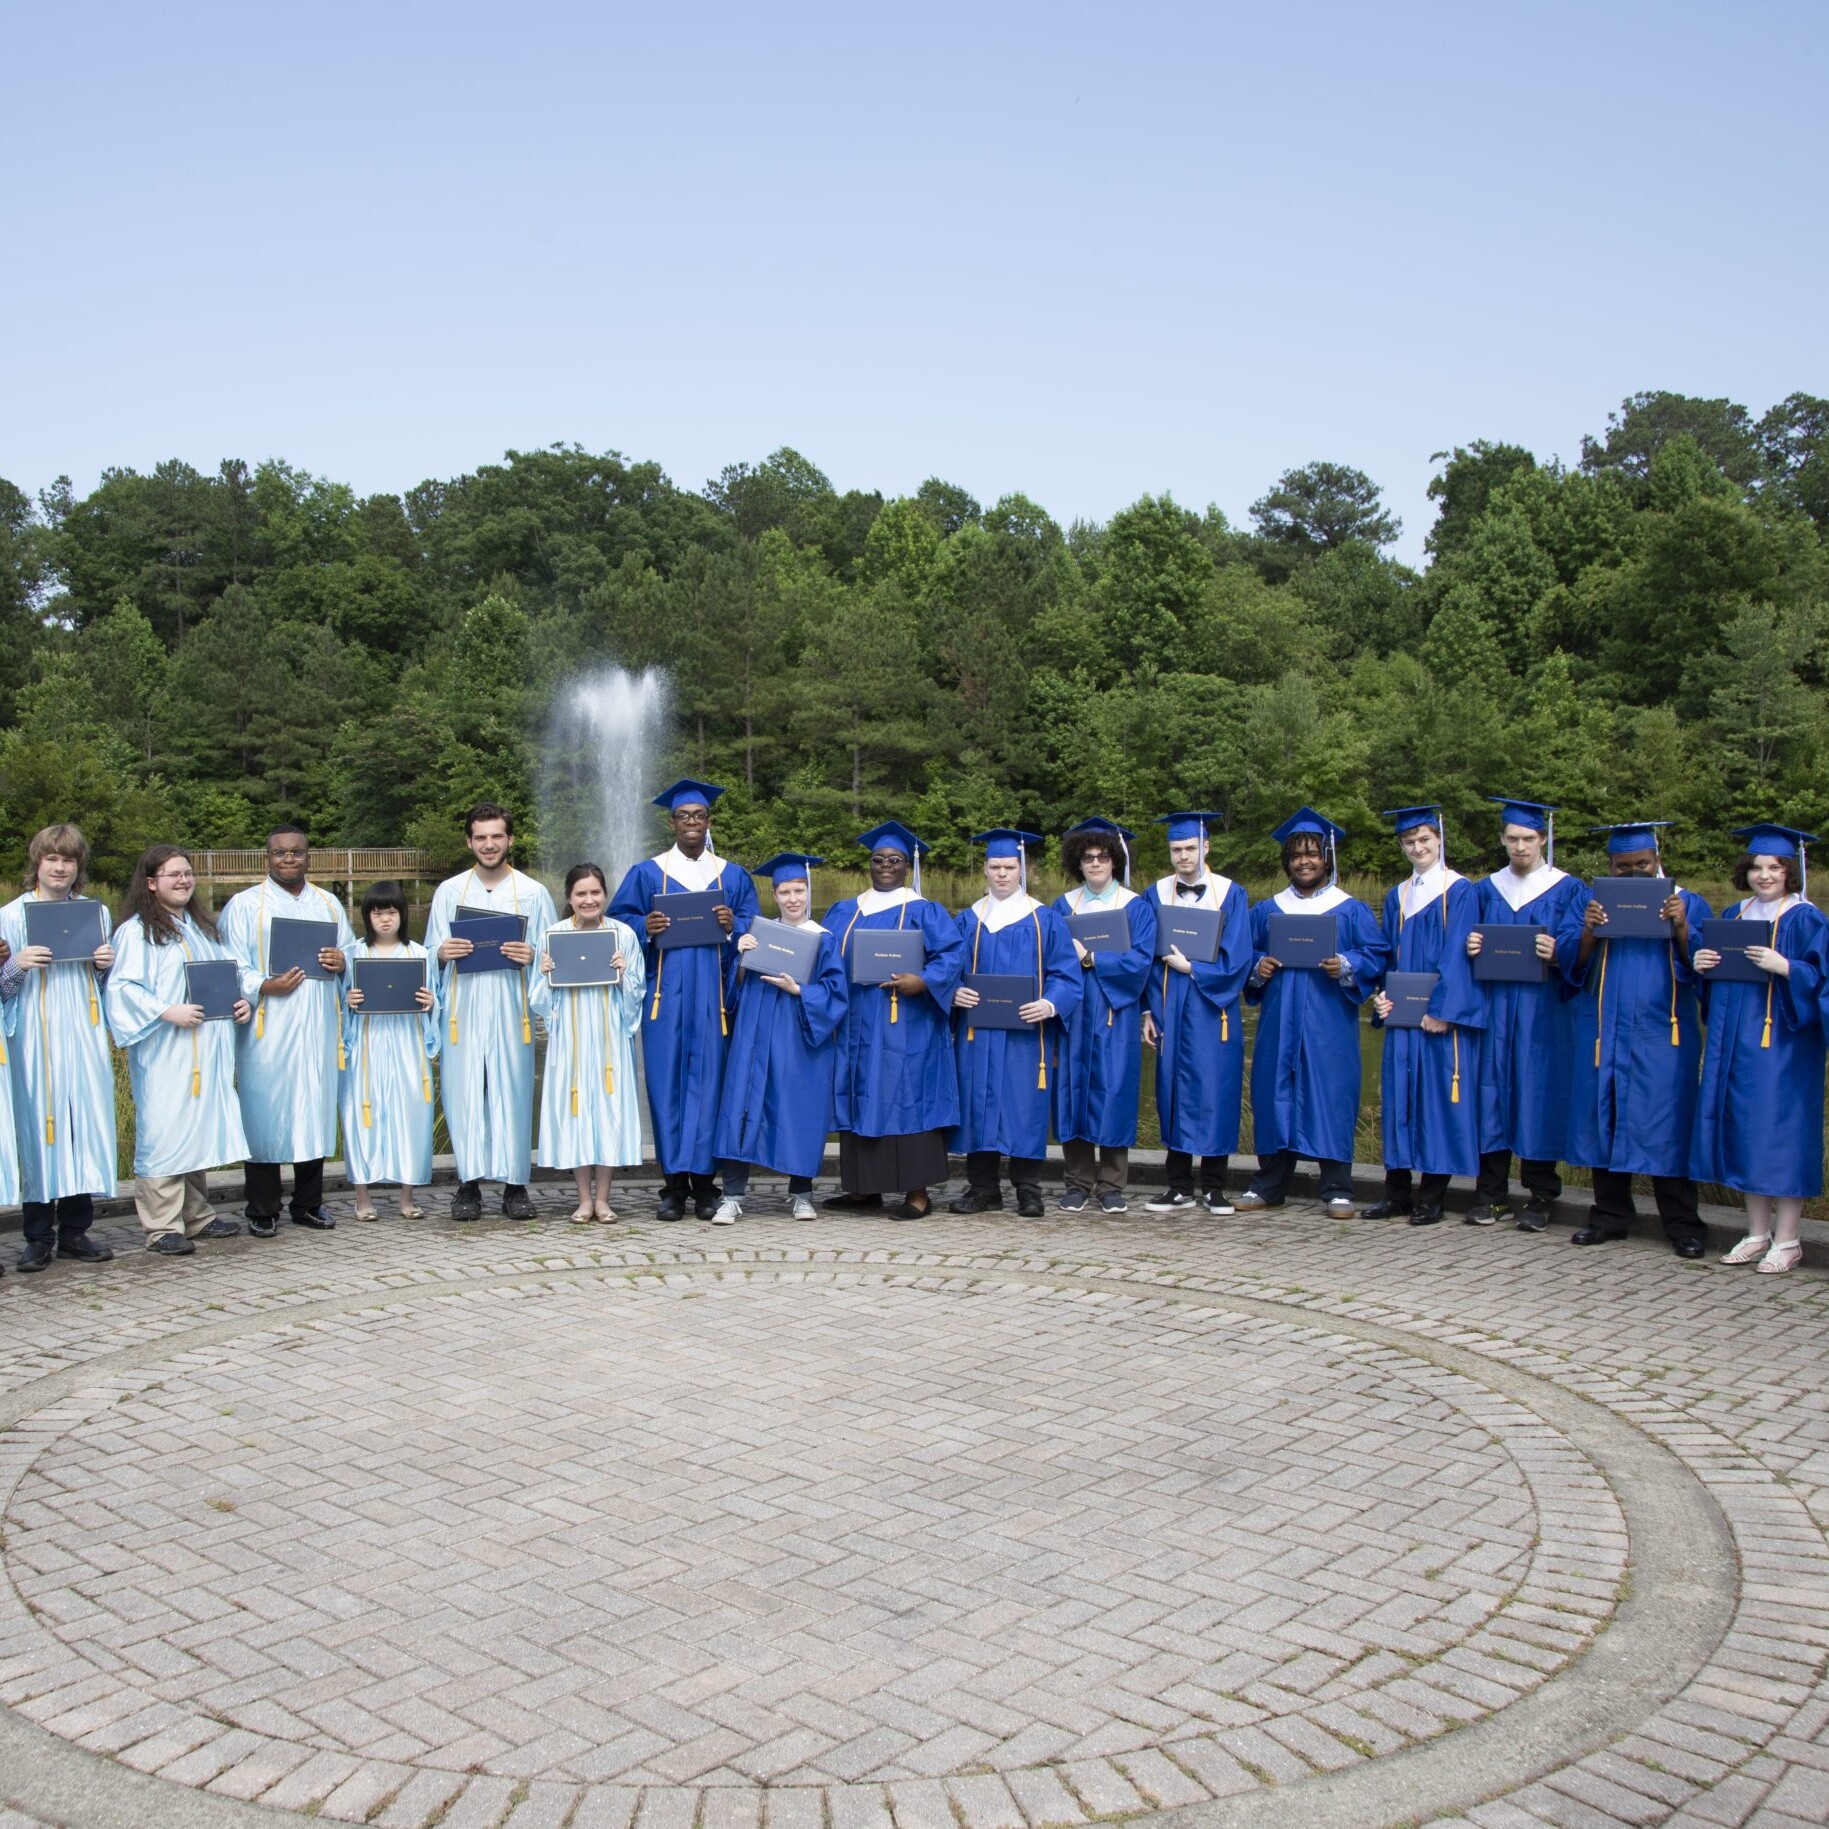 Group of Northstar graduates outside in front of water fountain holding diplomas